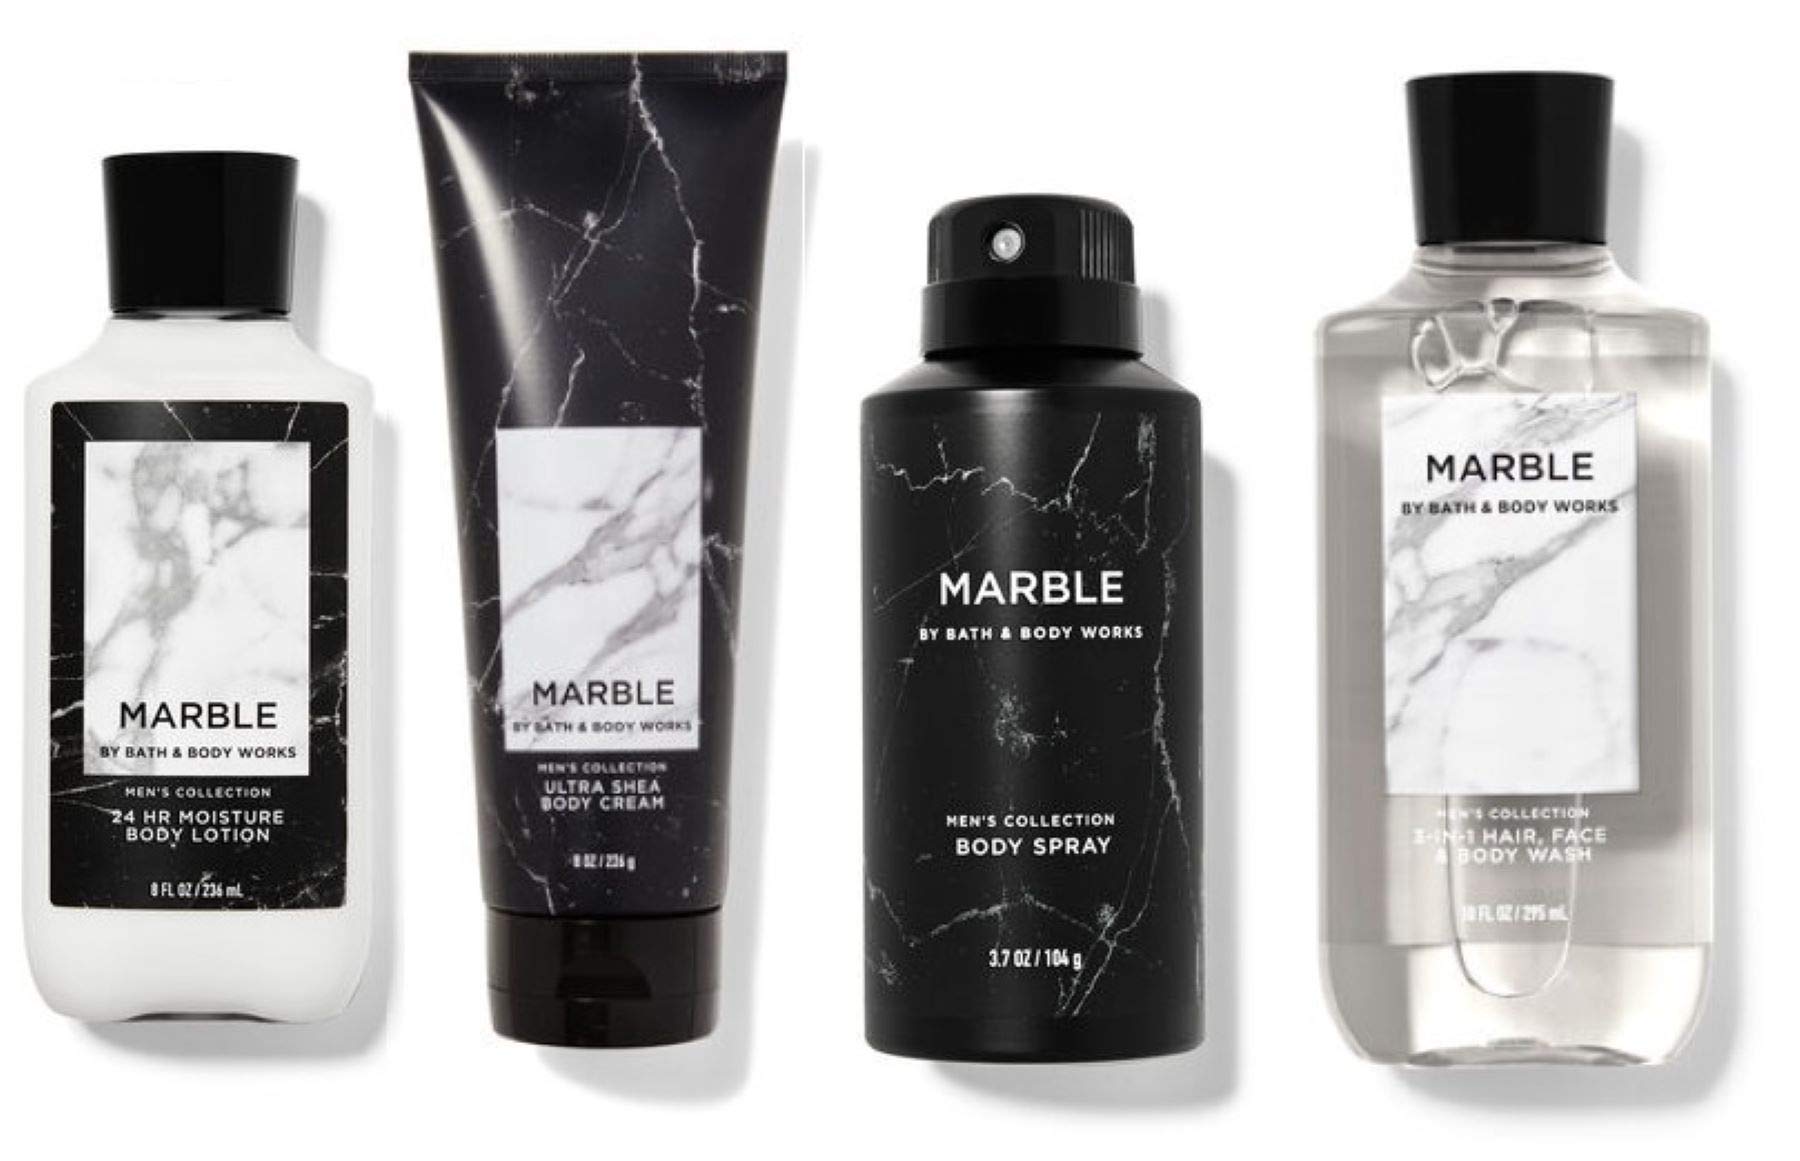 BATH AND BODY WORKS MARBLE FOR MEN DELUXE GIFT SET - Deodorizing Body Spray  - Body Lotion - Body